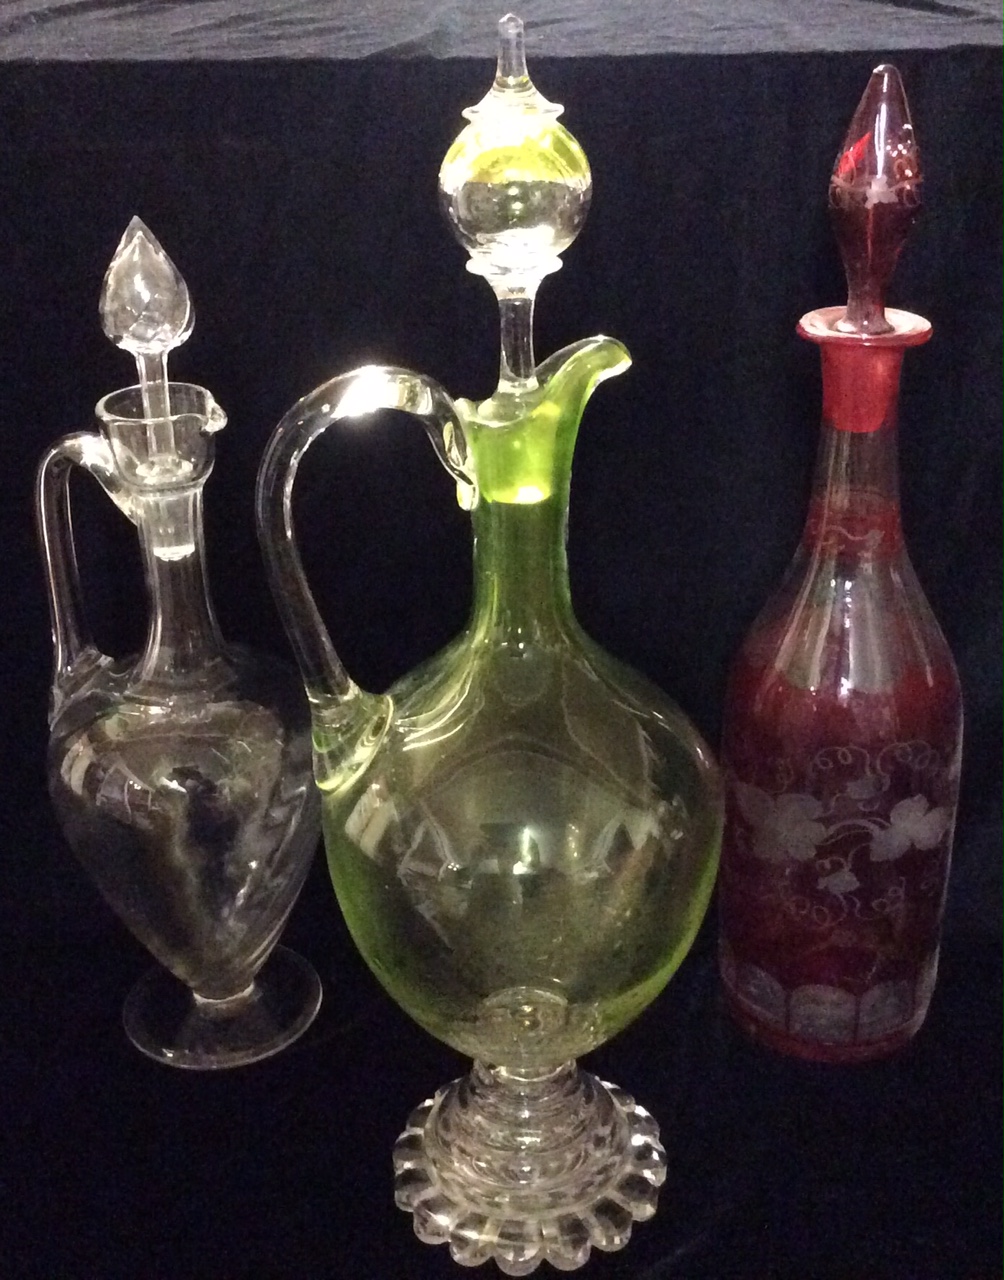 A VICTORIAN GREEN GLASS BULBOUS CLARET JUG With a clear glass handle and foot rim, together with a